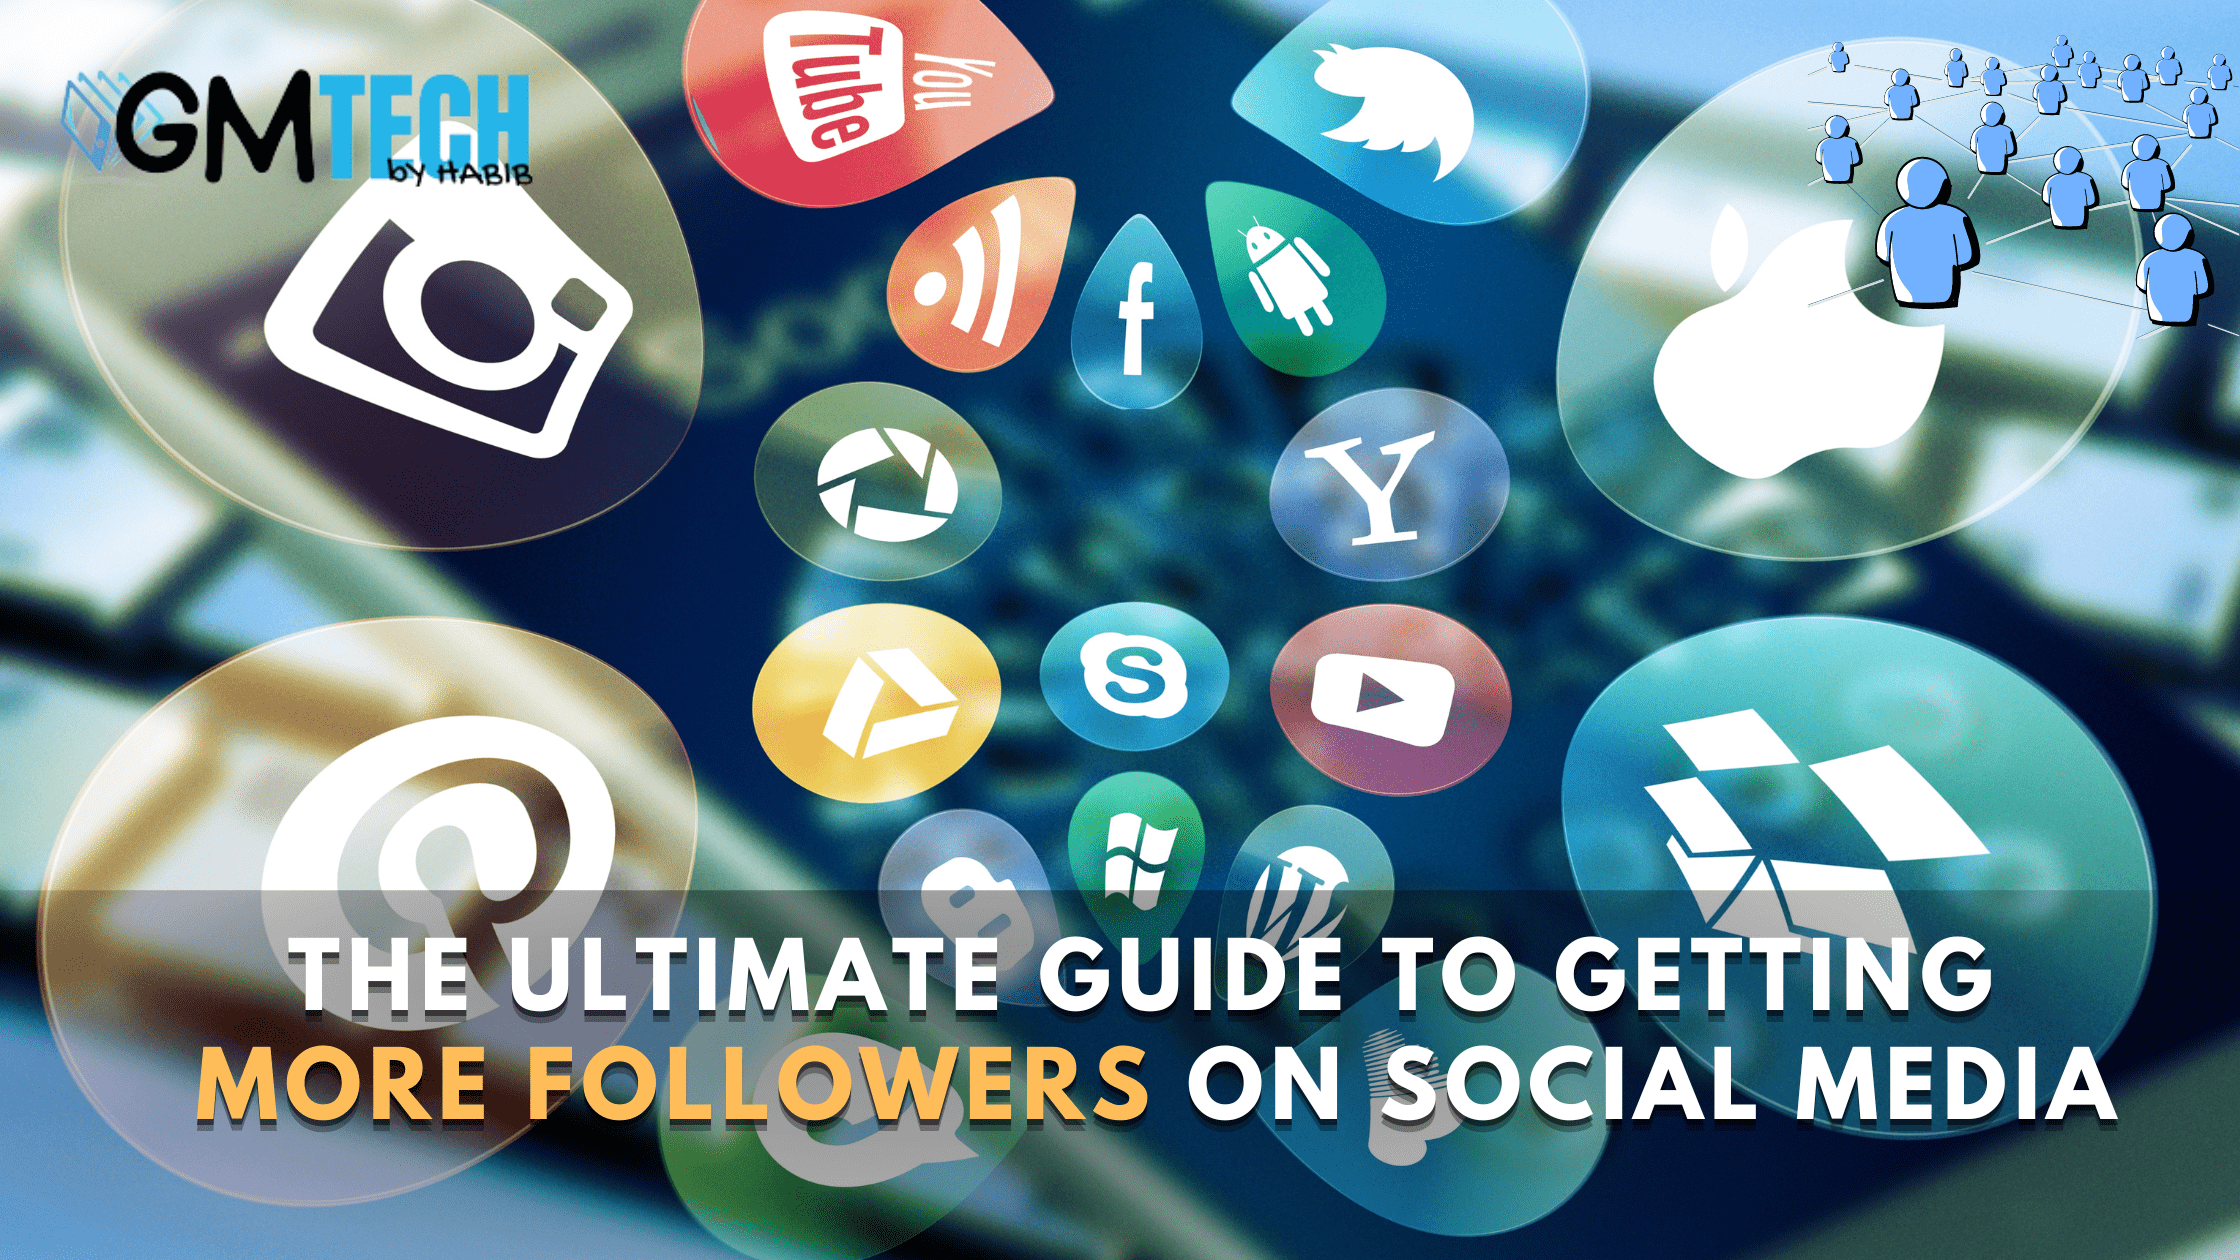 The Ultimate Guide To Getting More Followers On Social Media